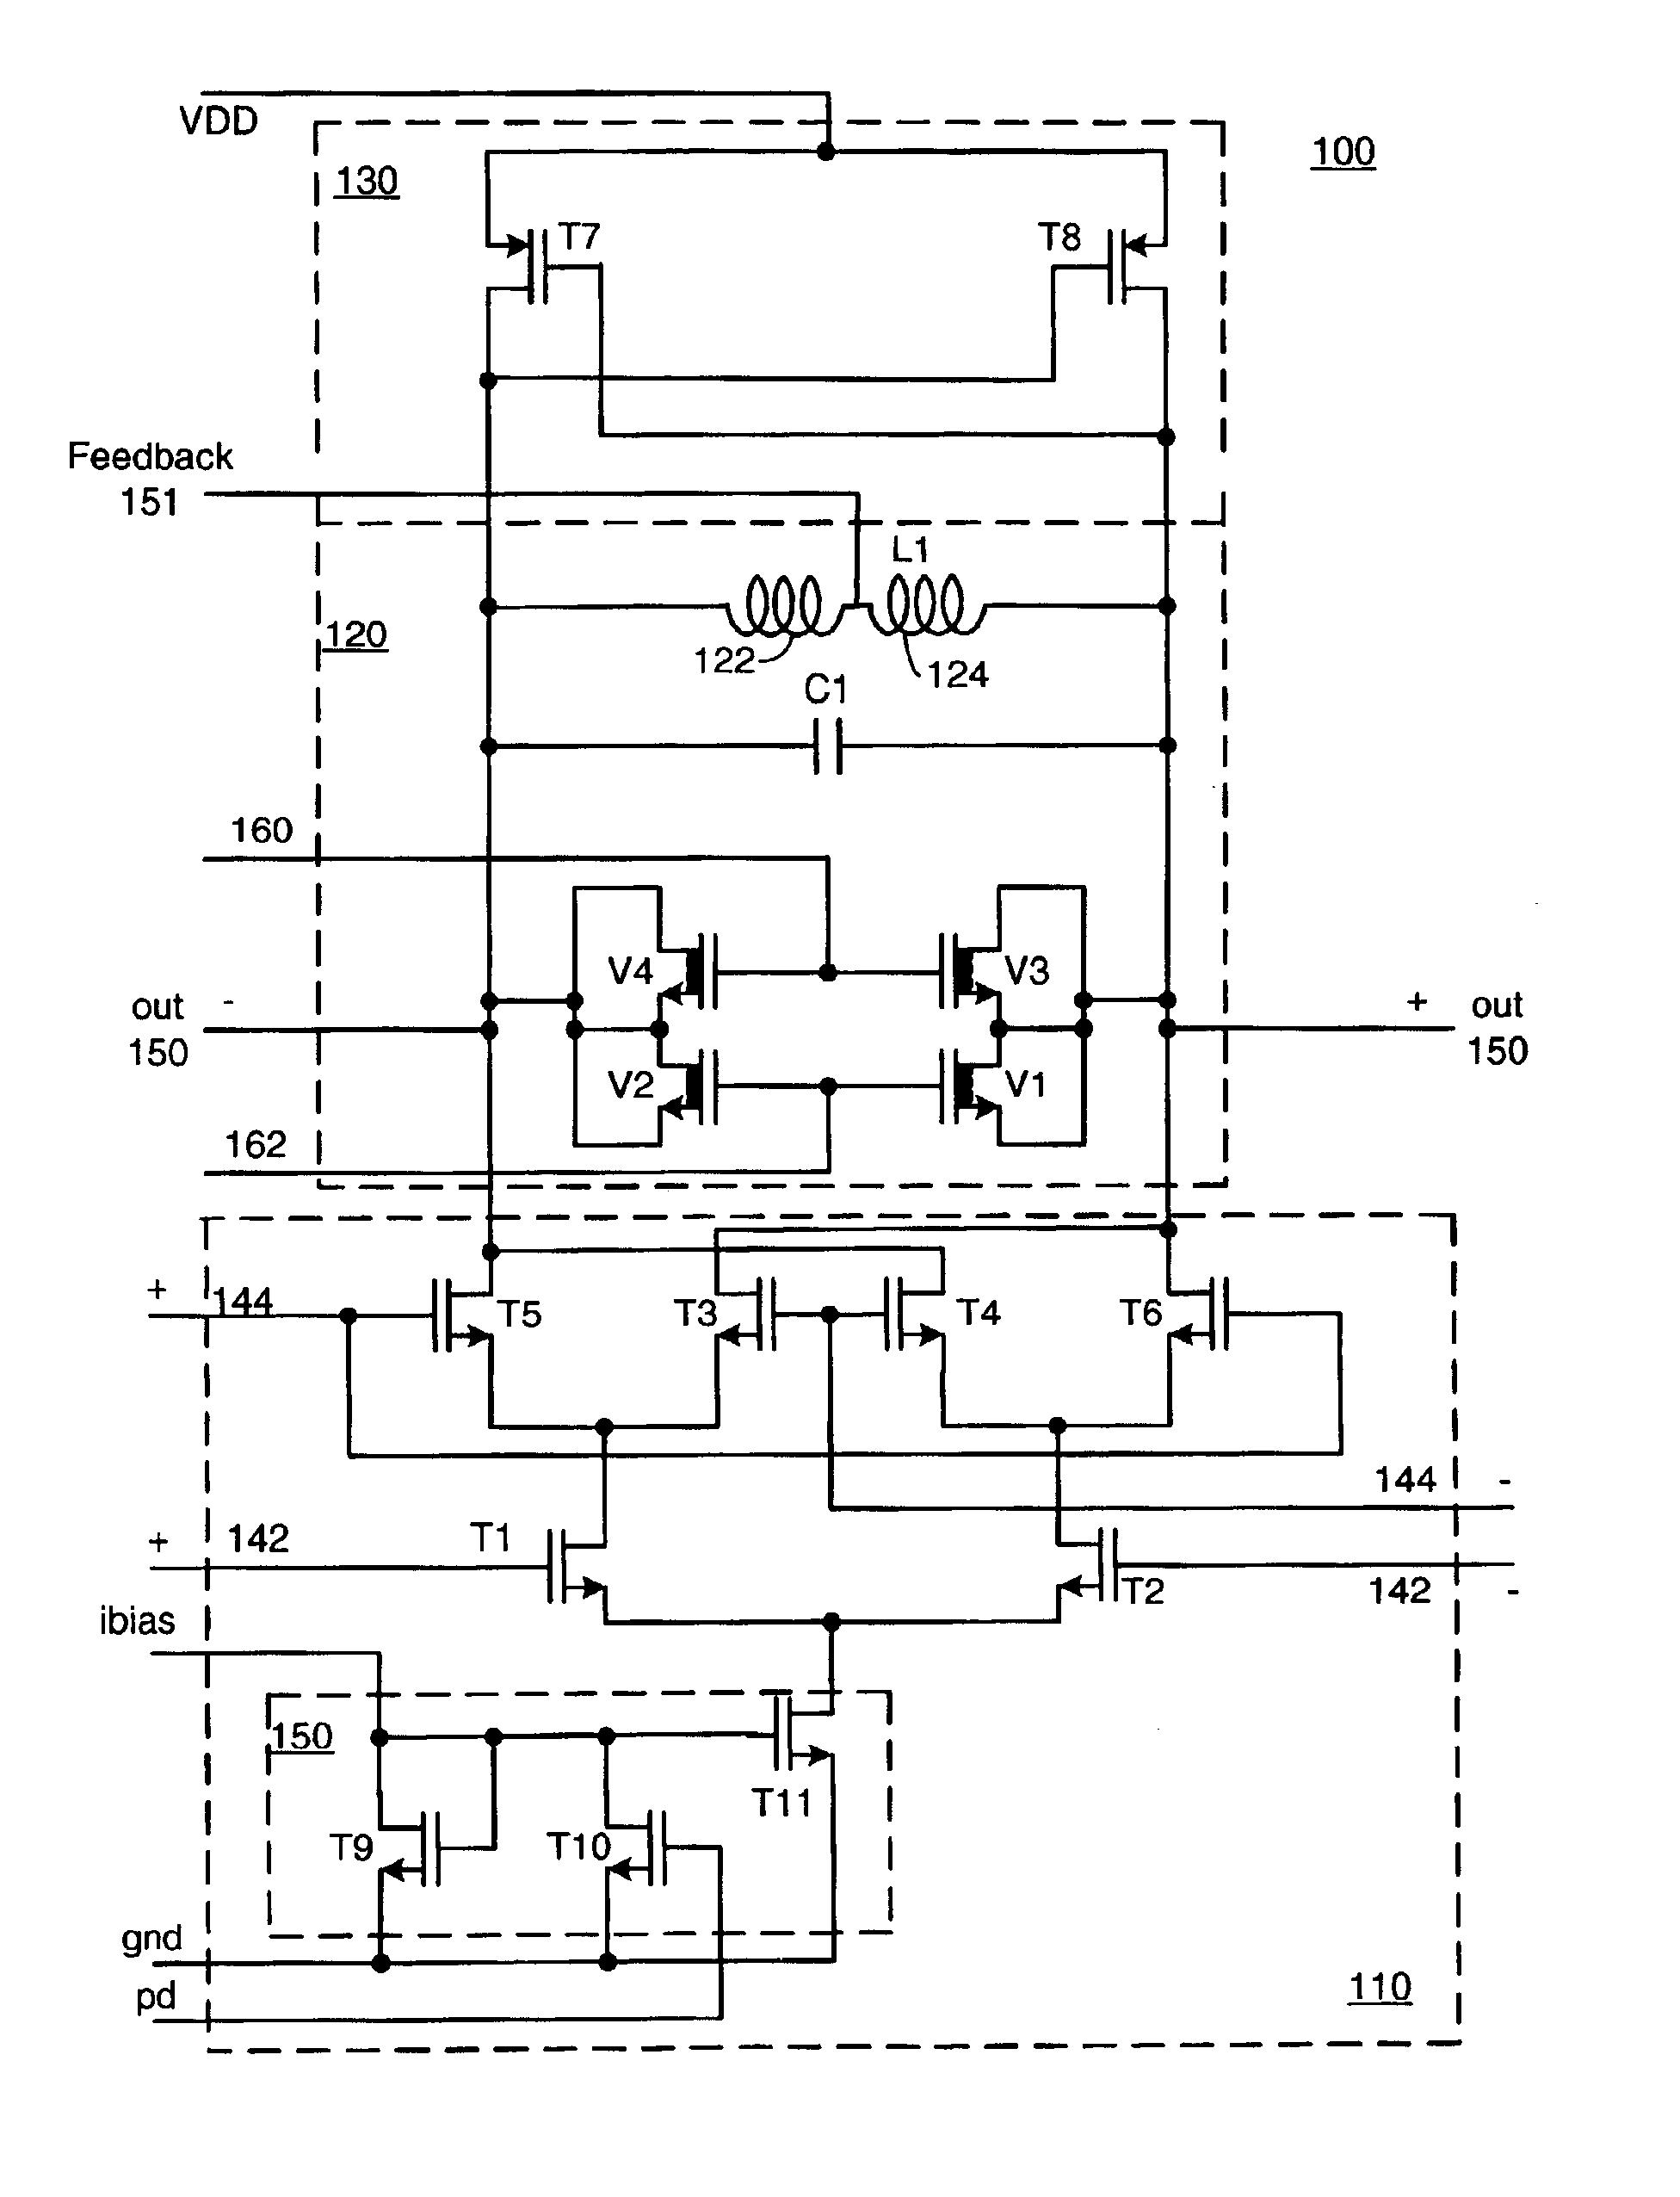 Frequency multiplier and amplification circuit